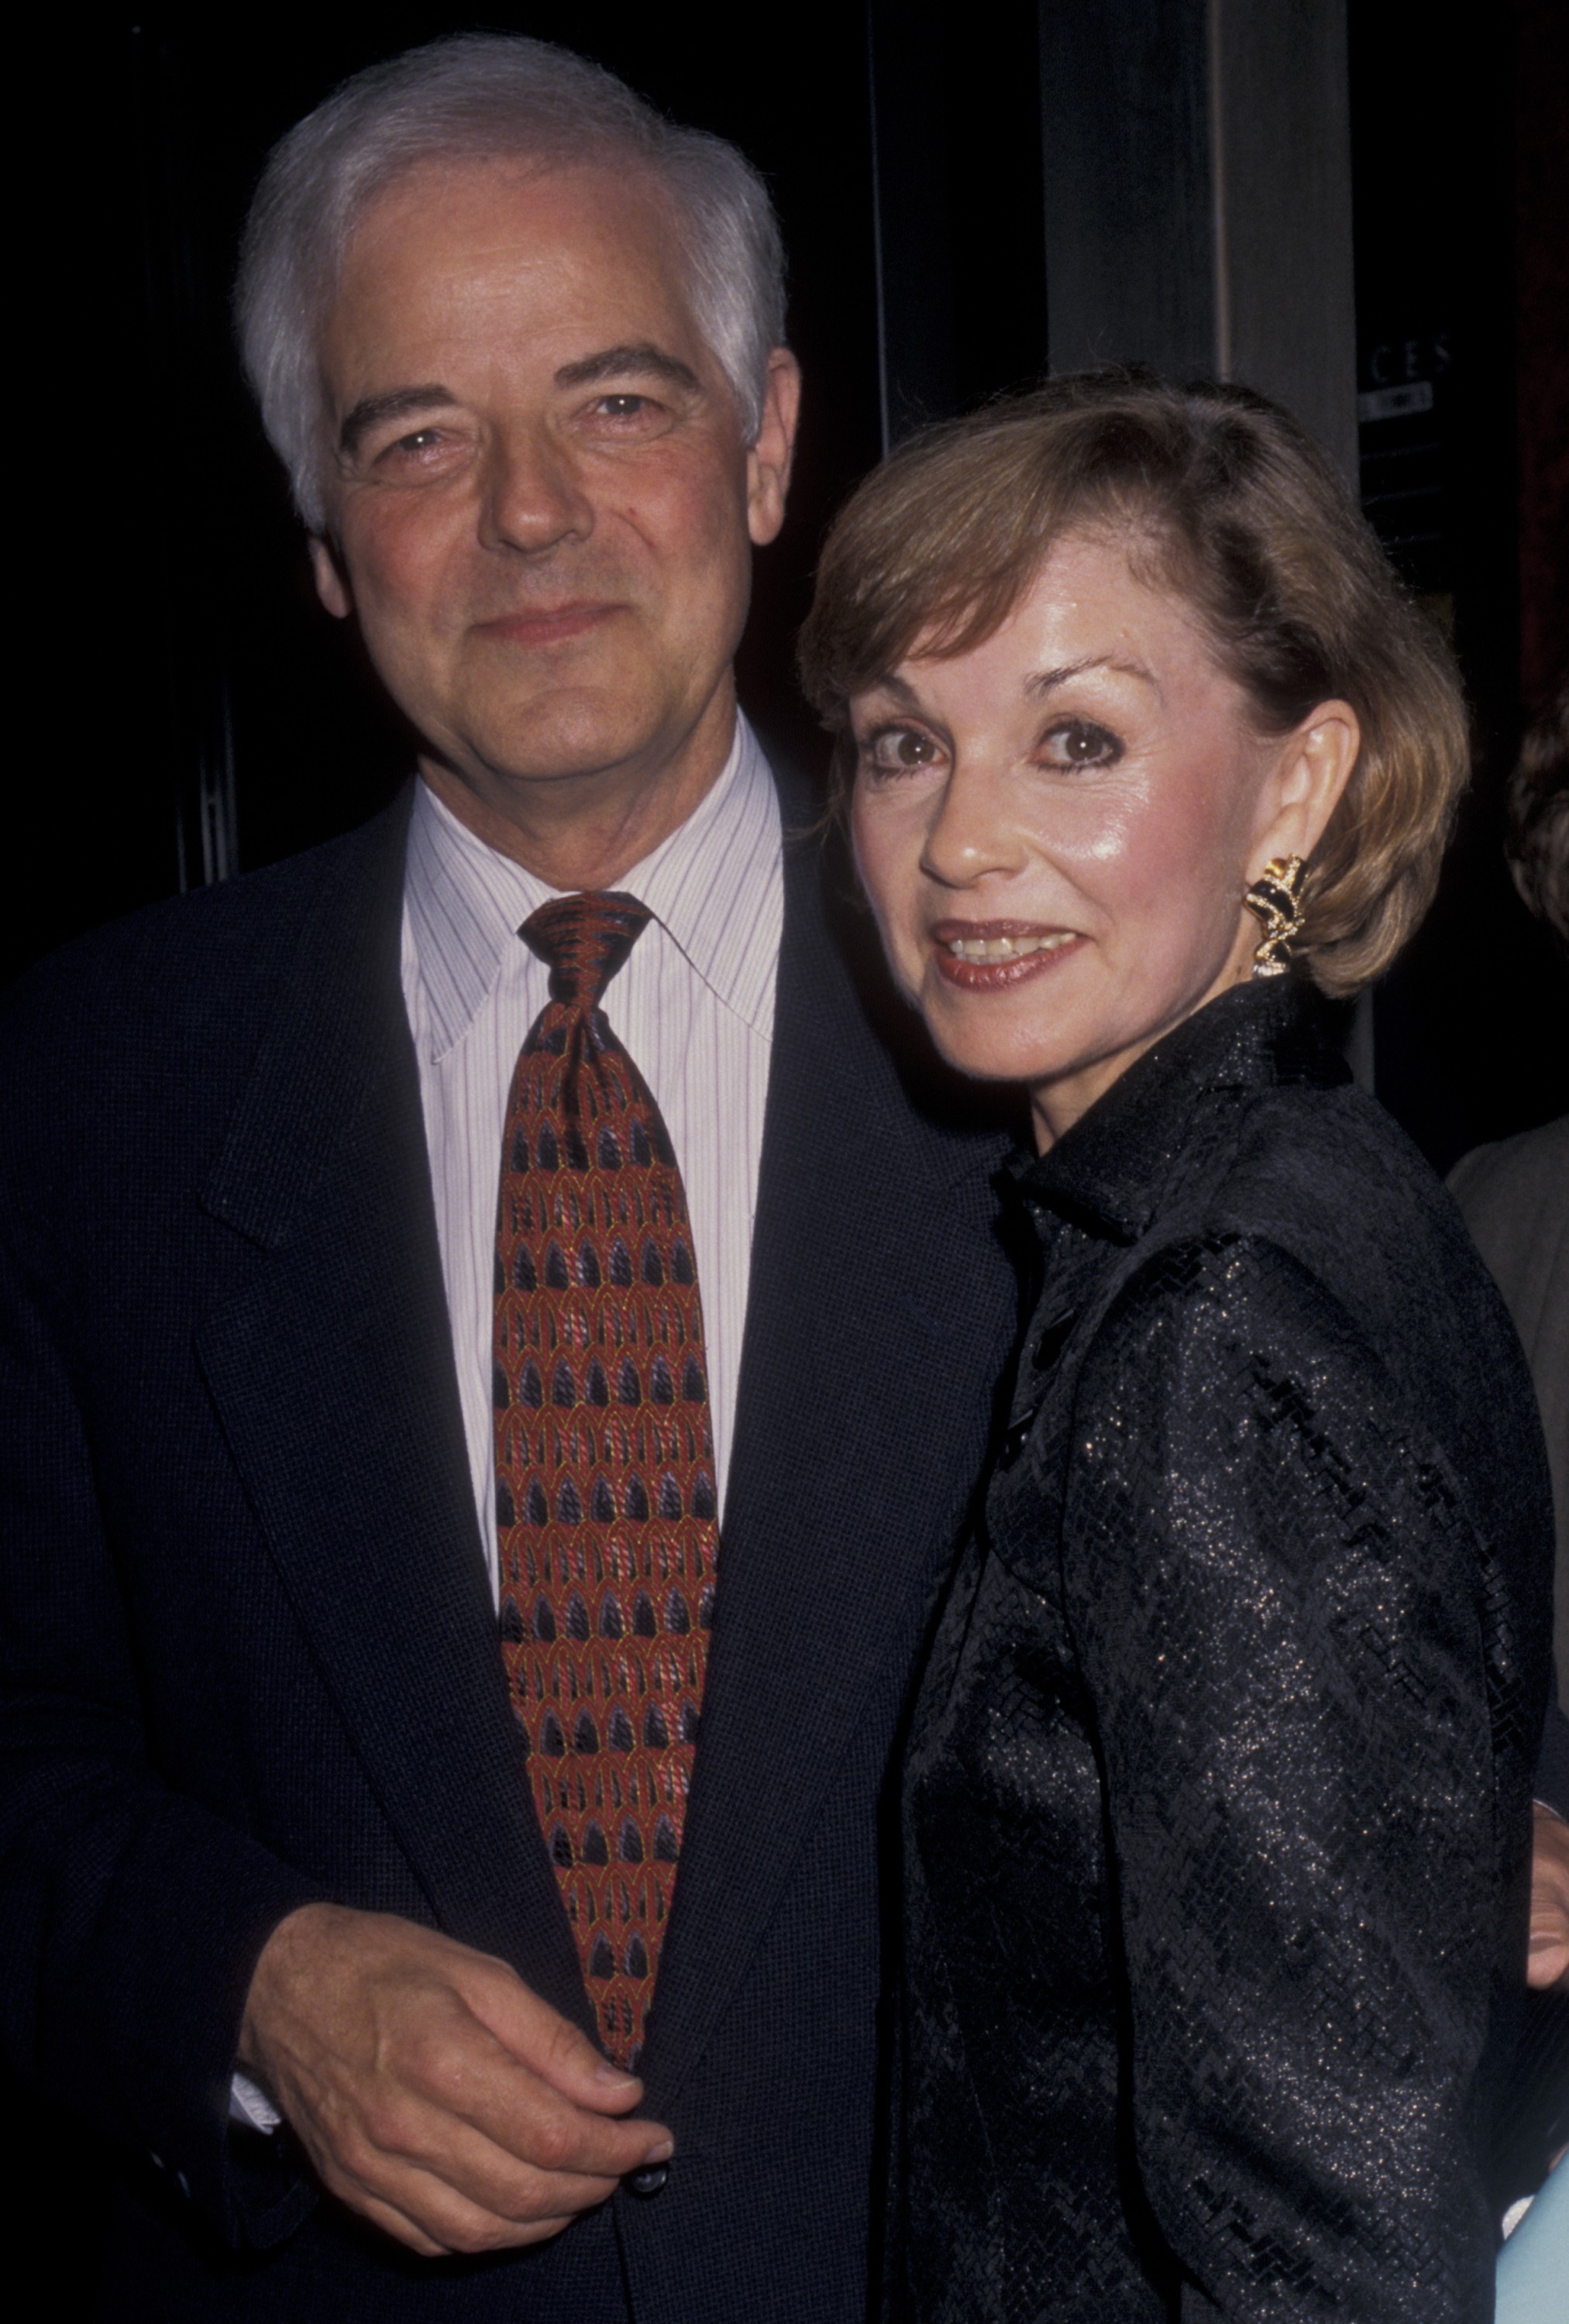 The actor's parents at the Ziegfeld Theater in New York Cityon September 22, 1997 | Source: Getty Images